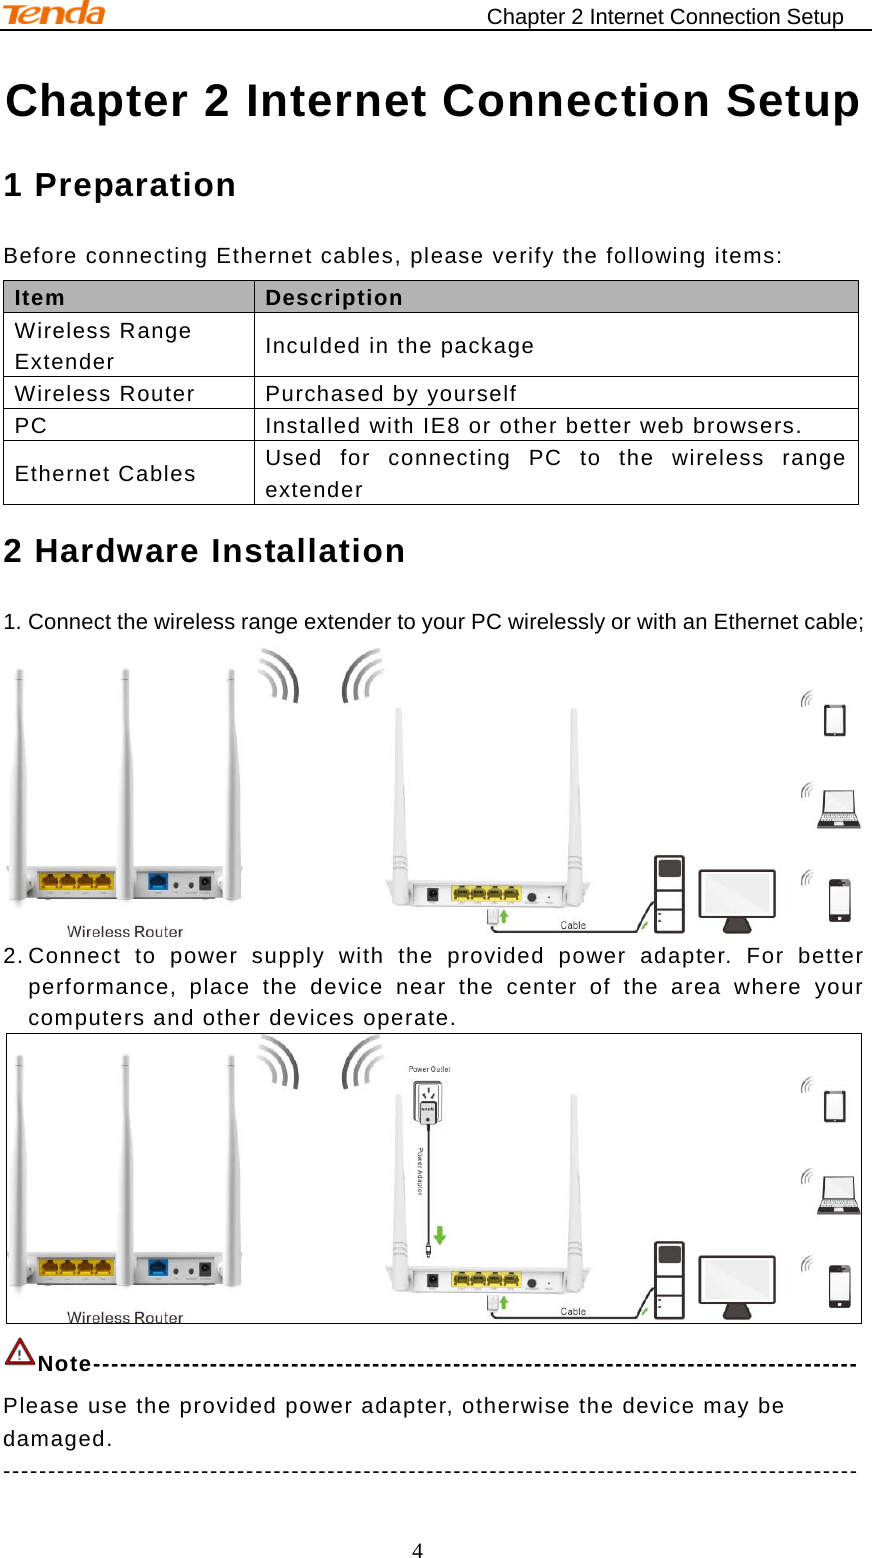                                    Chapter 2 Internet Connection Setup 4 Chapter 2 Internet Connection Setup 1 Preparation   Before connecting Ethernet cables, please verify the following items: Item   Description   Wireless Range Extender Inculded in the package Wireless Router Purchased by yourself PC Installed with IE8 or other better web browsers. Ethernet Cables Used for connecting PC to the wireless range extender   2 Hardware Installation 1. Connect the wireless range extender to your PC wirelessly or with an Ethernet cable;  2. Connect to power supply with the provided power adapter. For better performance, place the device near the center of the area where your computers and other devices operate.  Note------------------------------------------------------------------------------------- Please use the provided power adapter, otherwise the device may be damaged. ----------------------------------------------------------------------------------------------- 